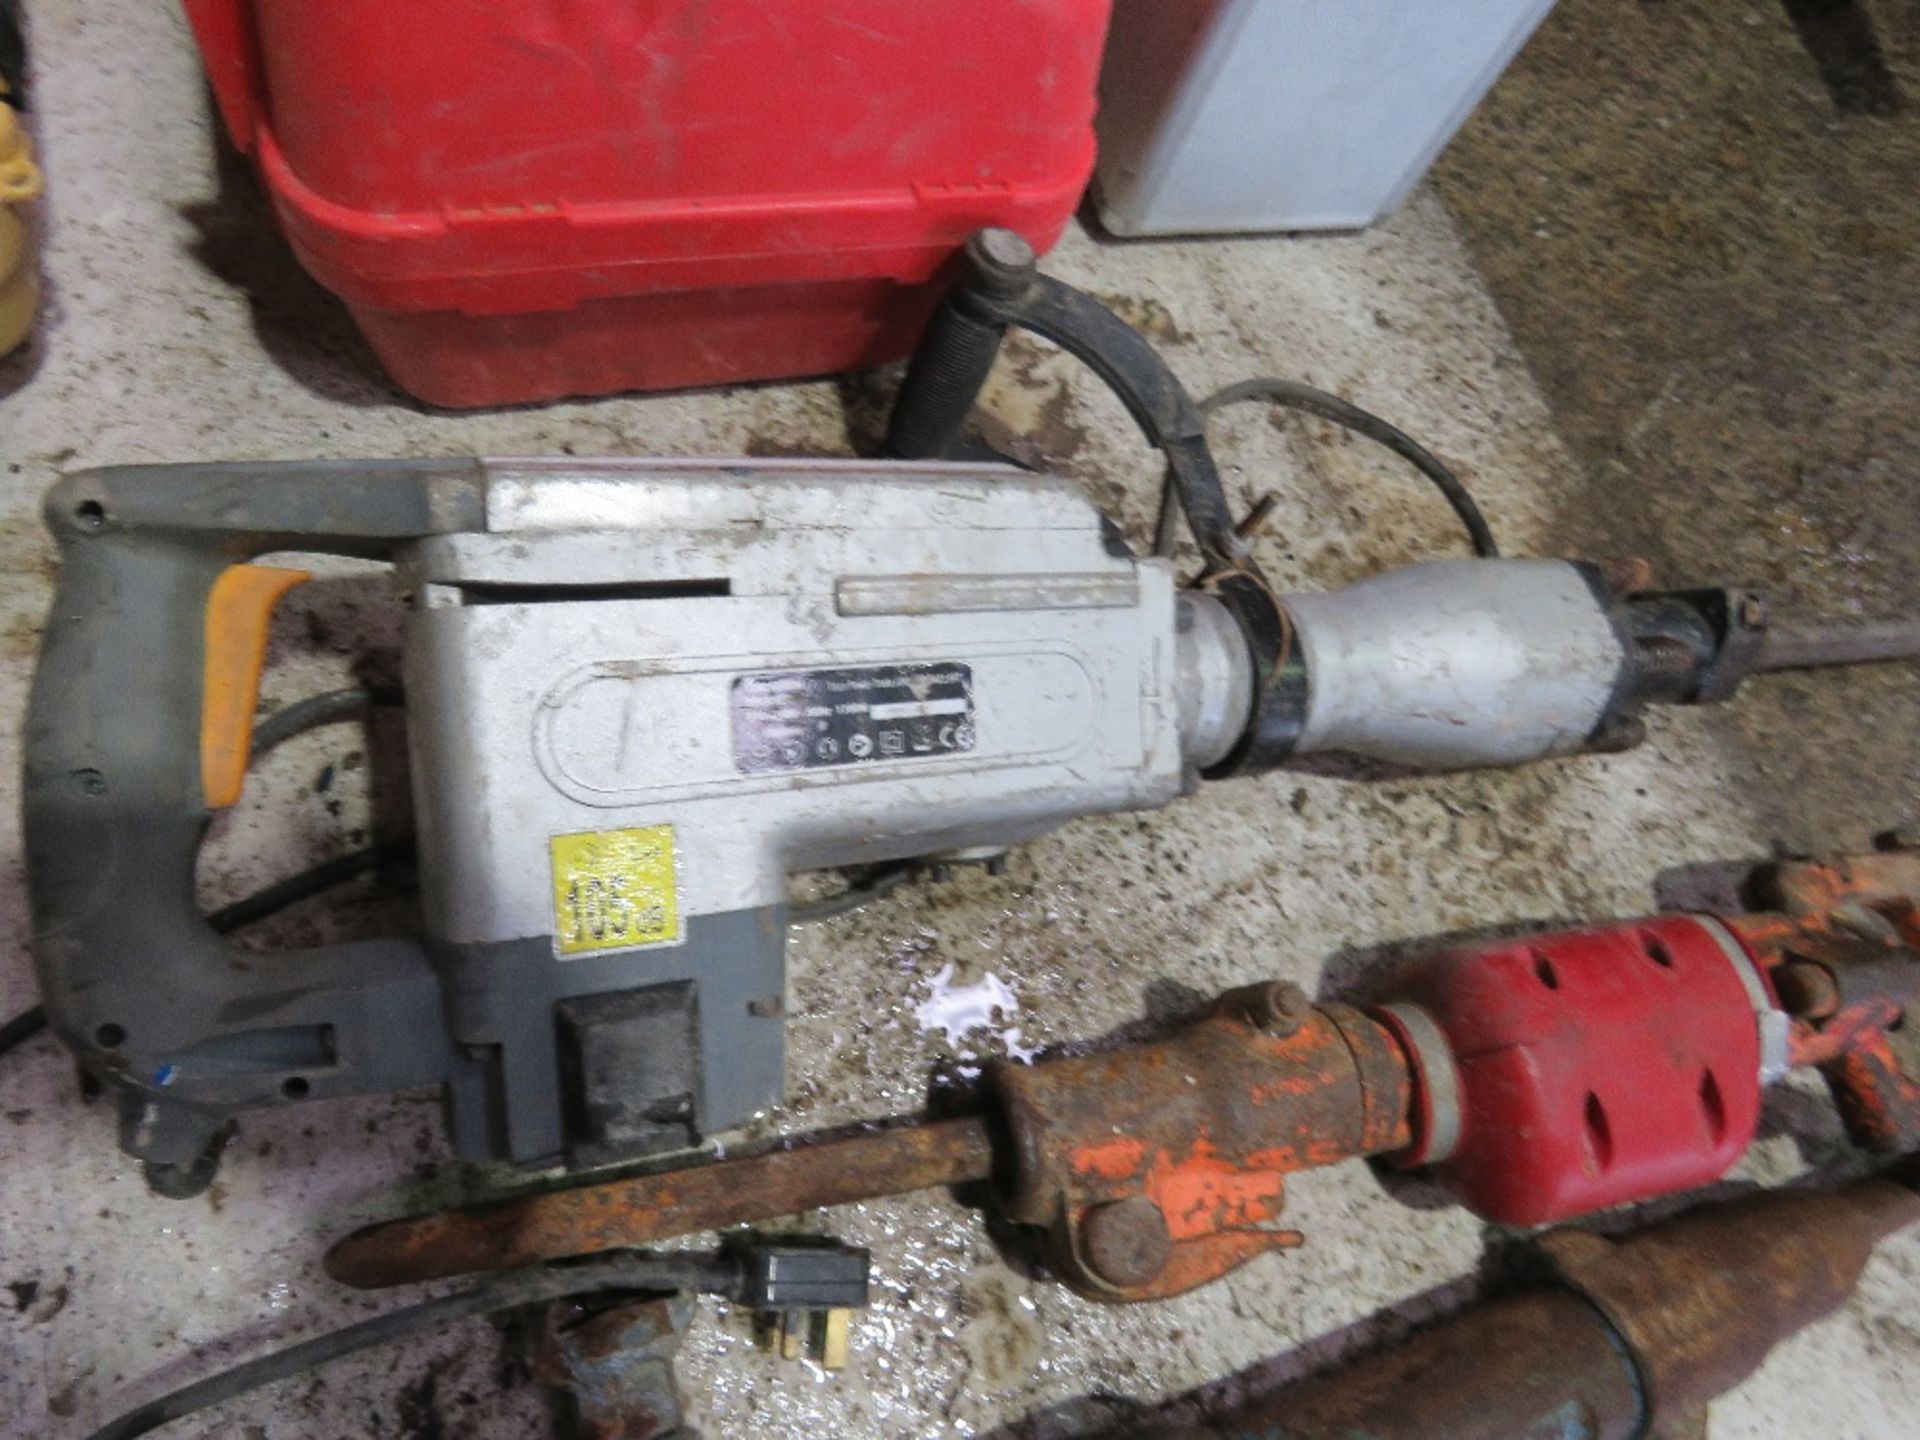 2 X AIR PICKS / DEMOLITION HAMMERS PLUS A TITAN 240VOLT BREAKER.....THIS LOT IS SOLD UNDER THE AUCTI - Image 3 of 7